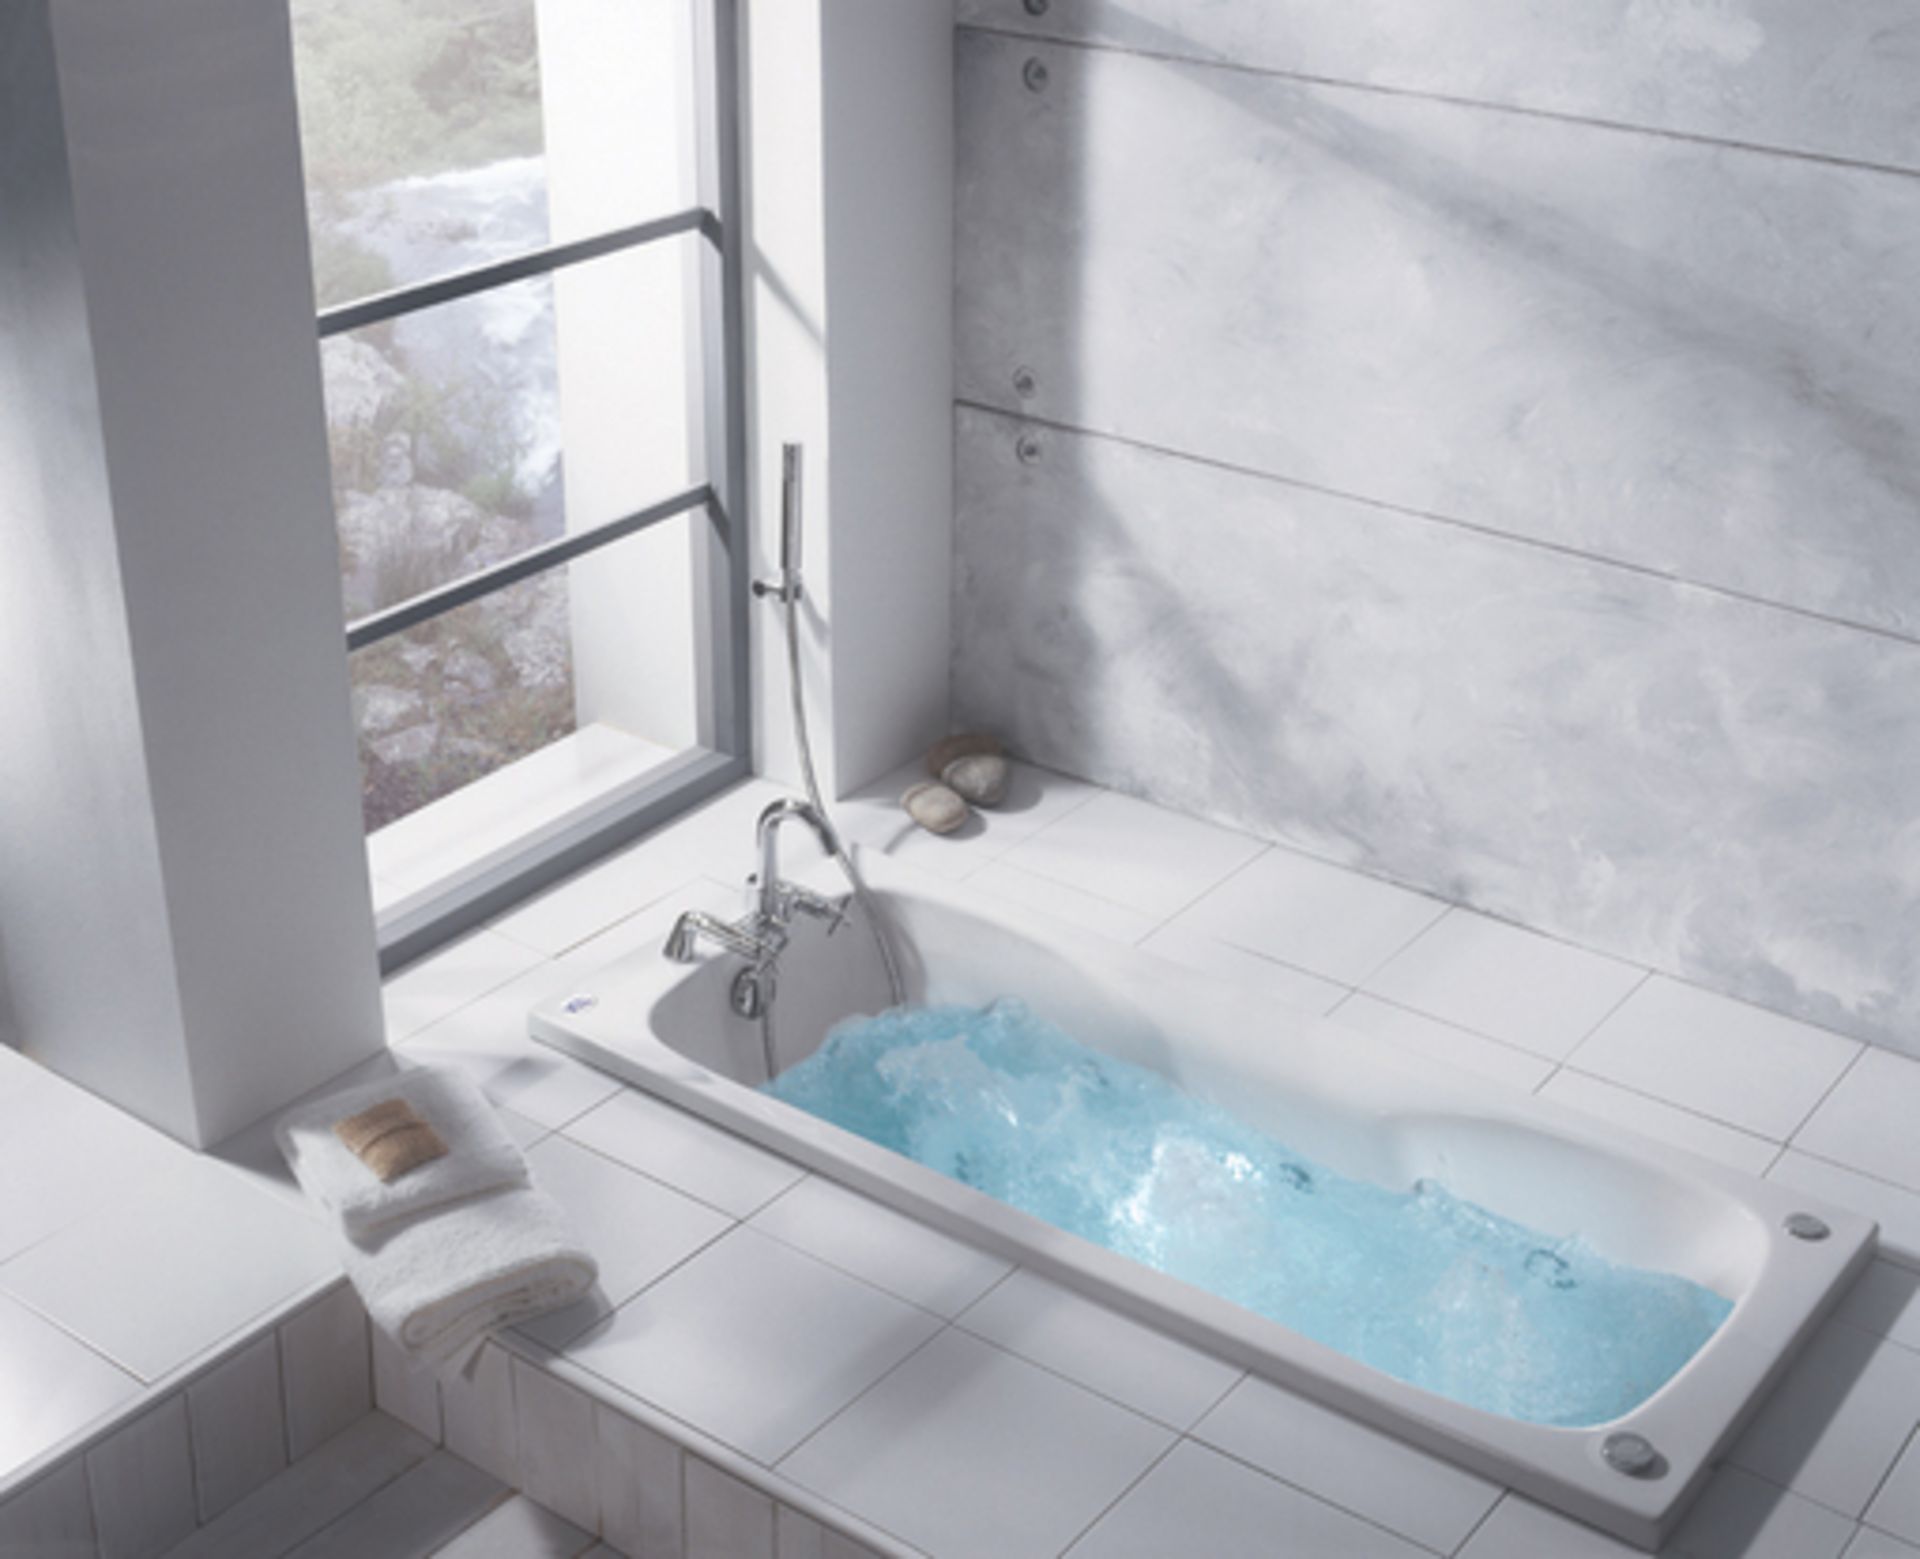 1 x Kudos Single End Inset Bath Tub - Vogue Bathrooms - 1800x800mm - Brand New Stock - Ref P6 - High - Image 3 of 4